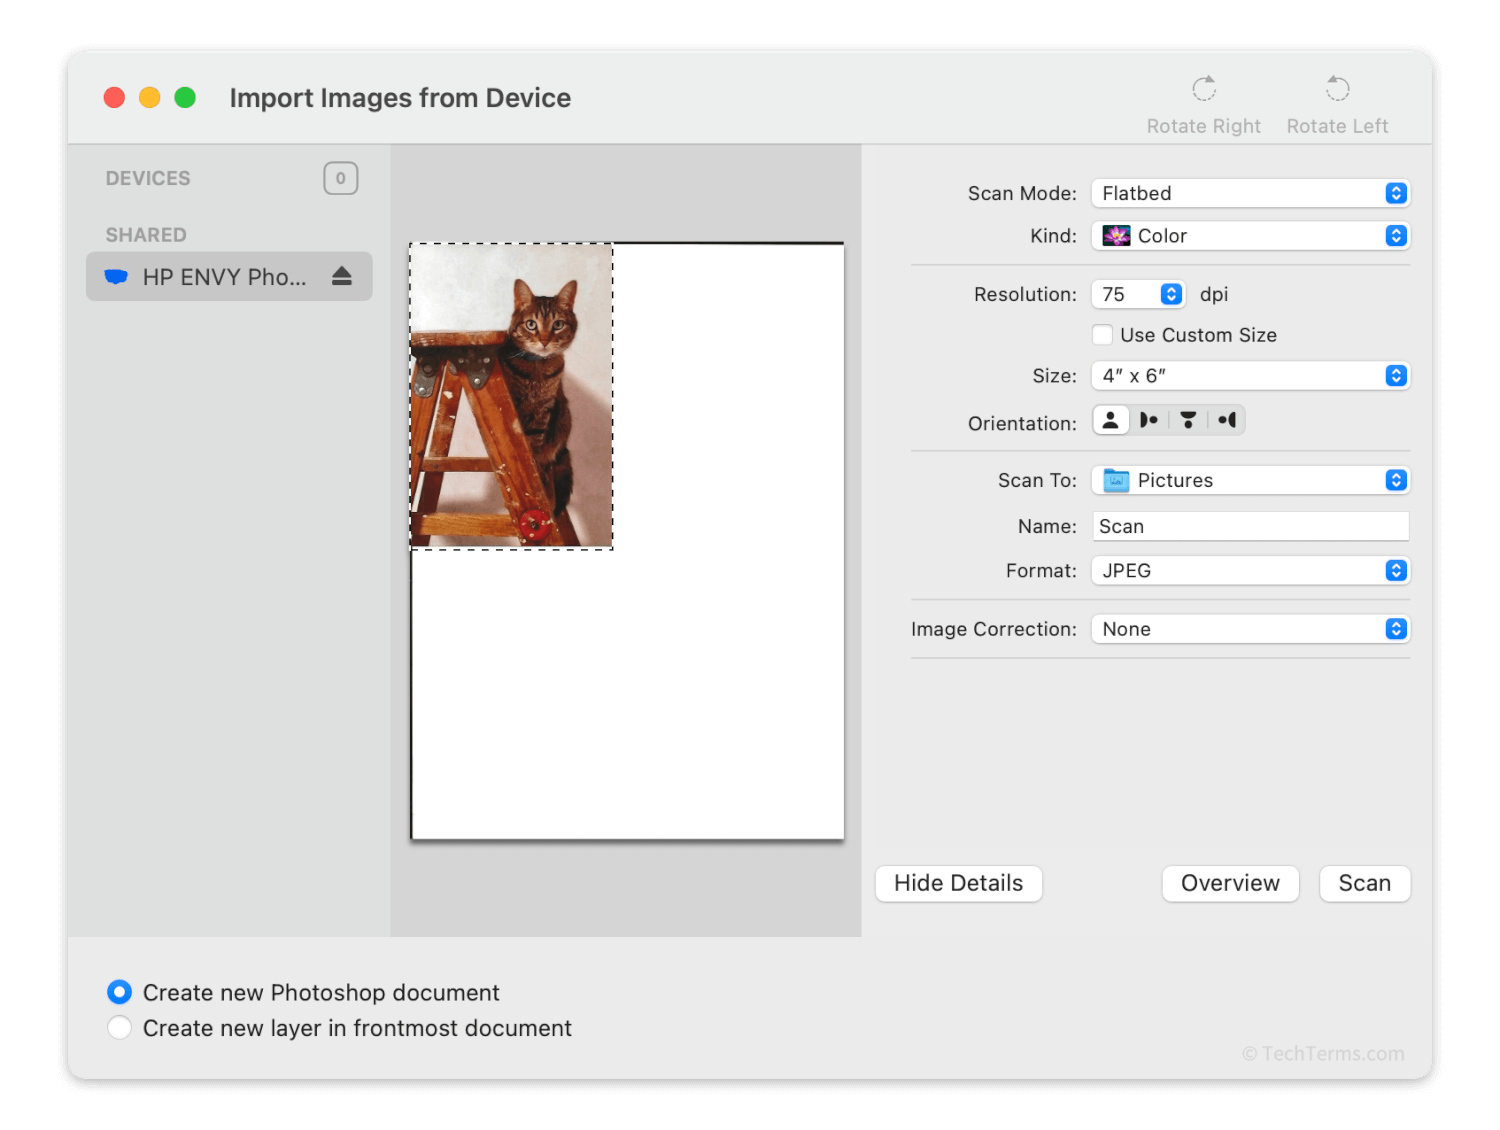 Photoshop uses TWAIN to import images from scanners and other devices